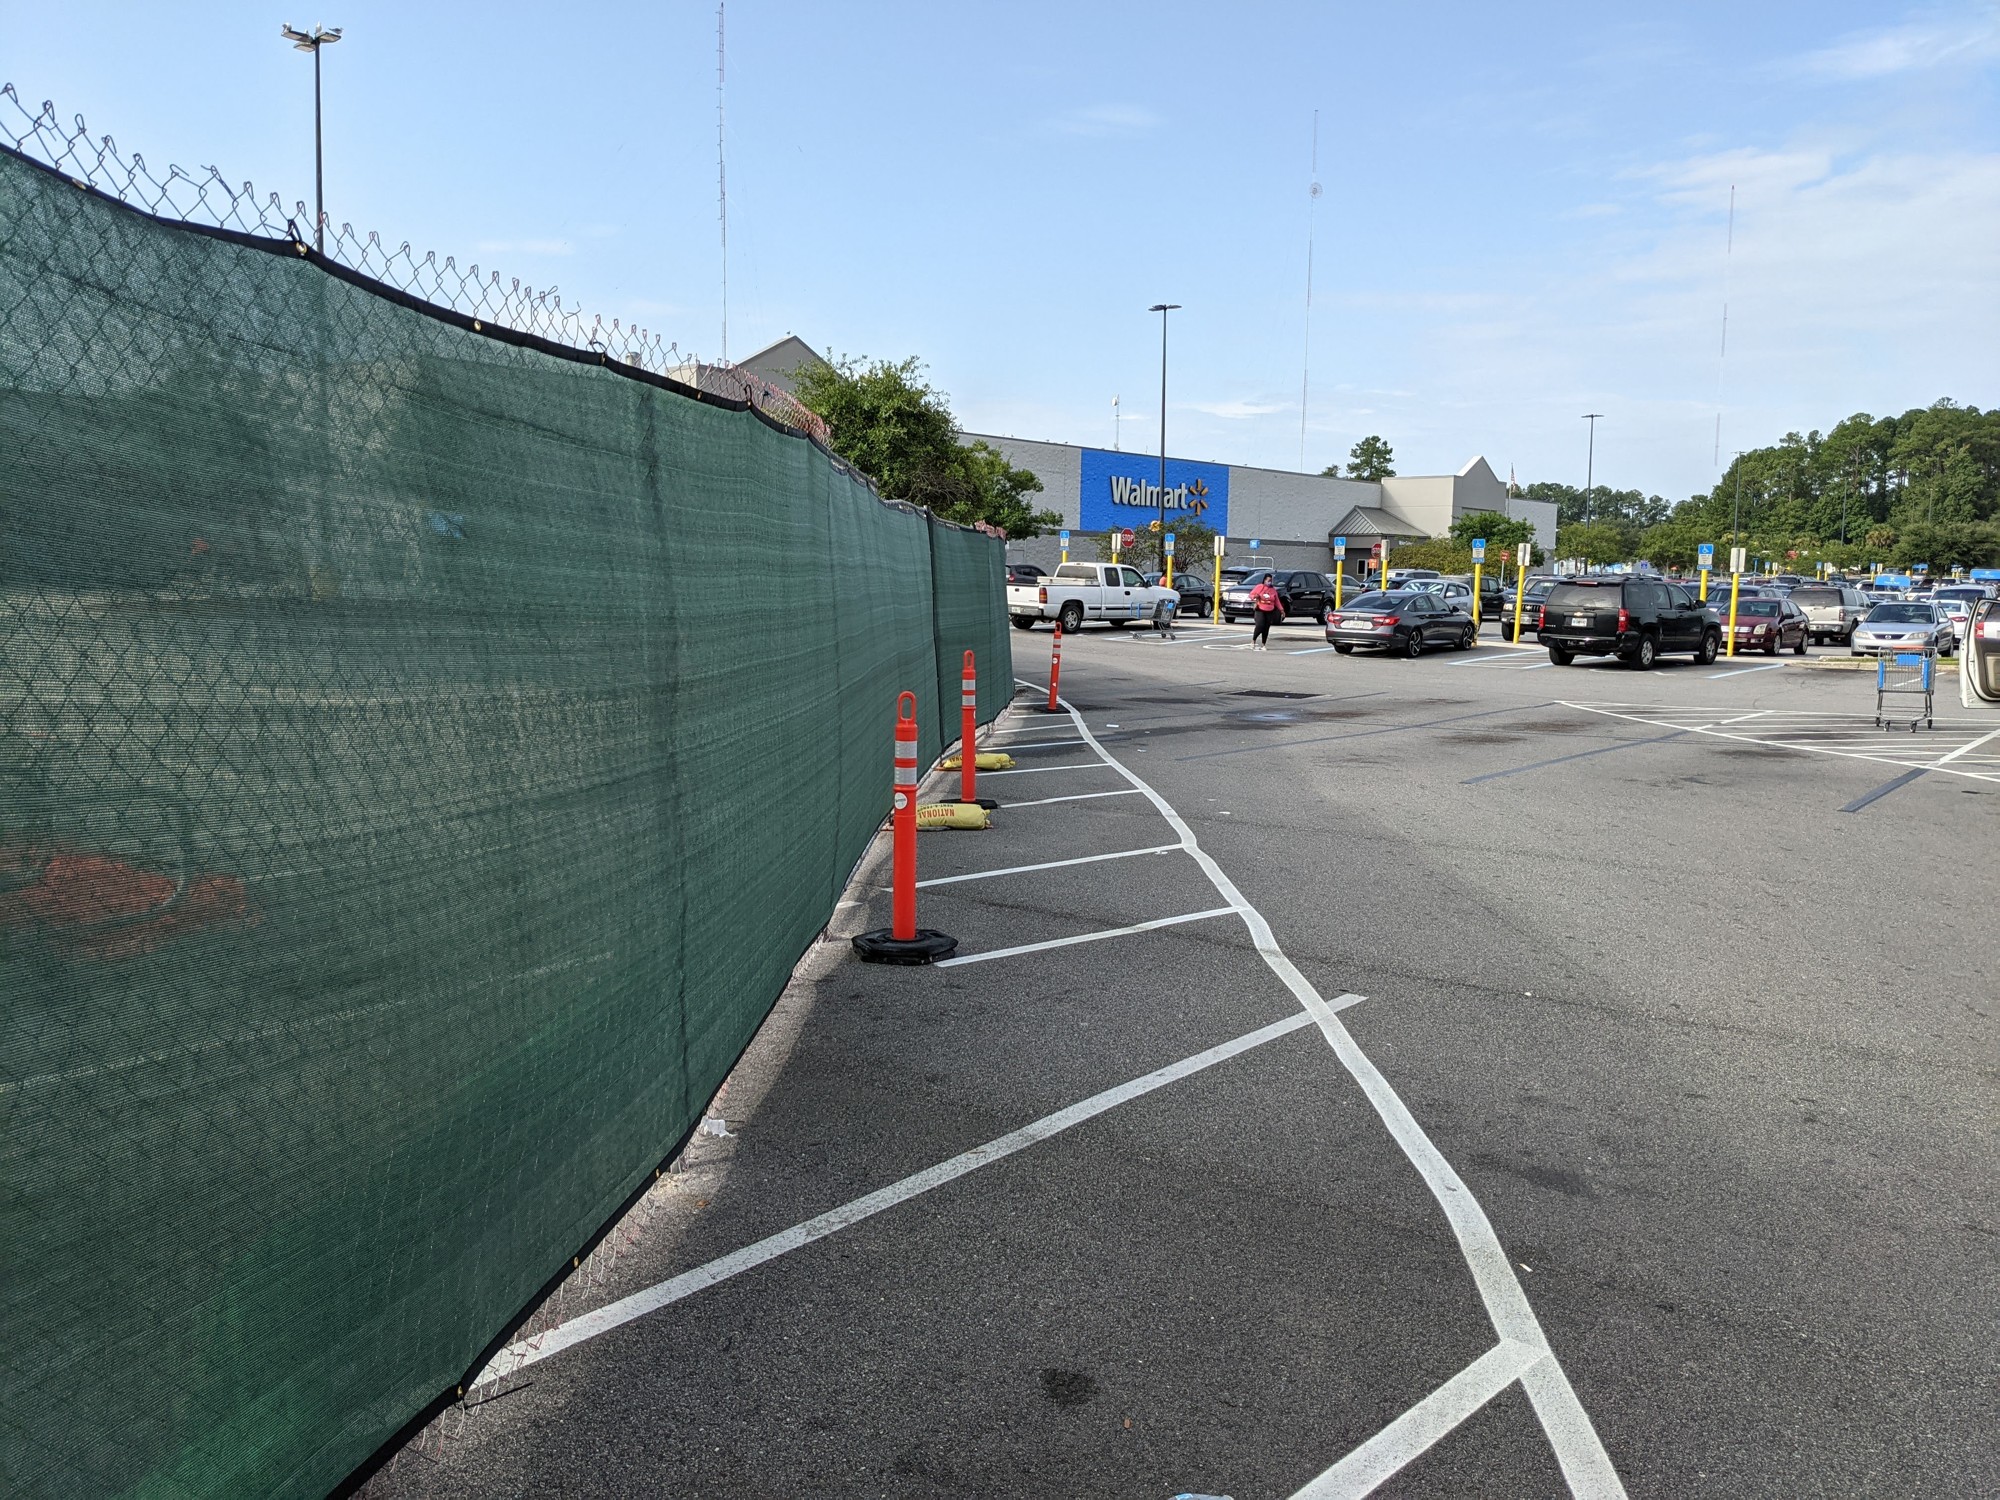 Construction barriers are up at the Walmart at 6830 Normandy Blvd. in West Jacksonville.